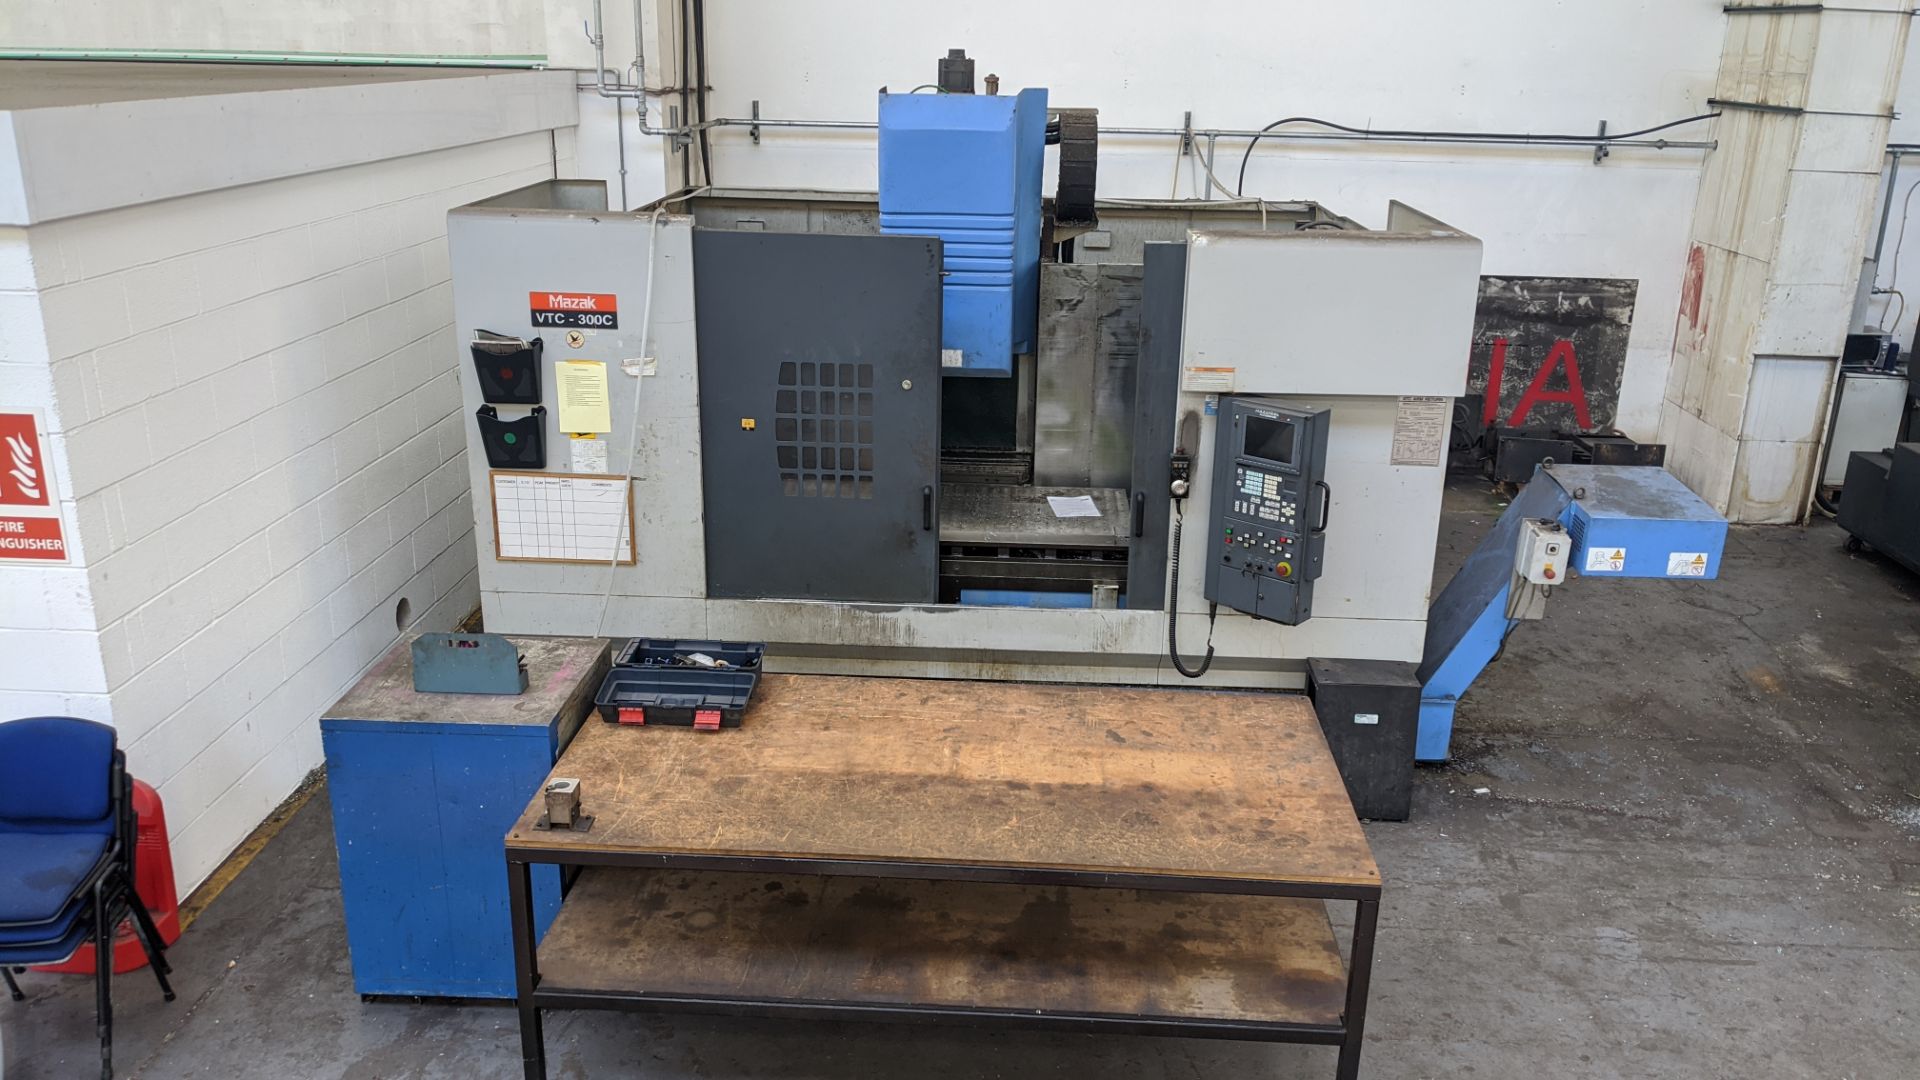 2001 Mazak VTC-300C machining centre with Mazatrol 640M controller. This lot recently had the - Image 3 of 28